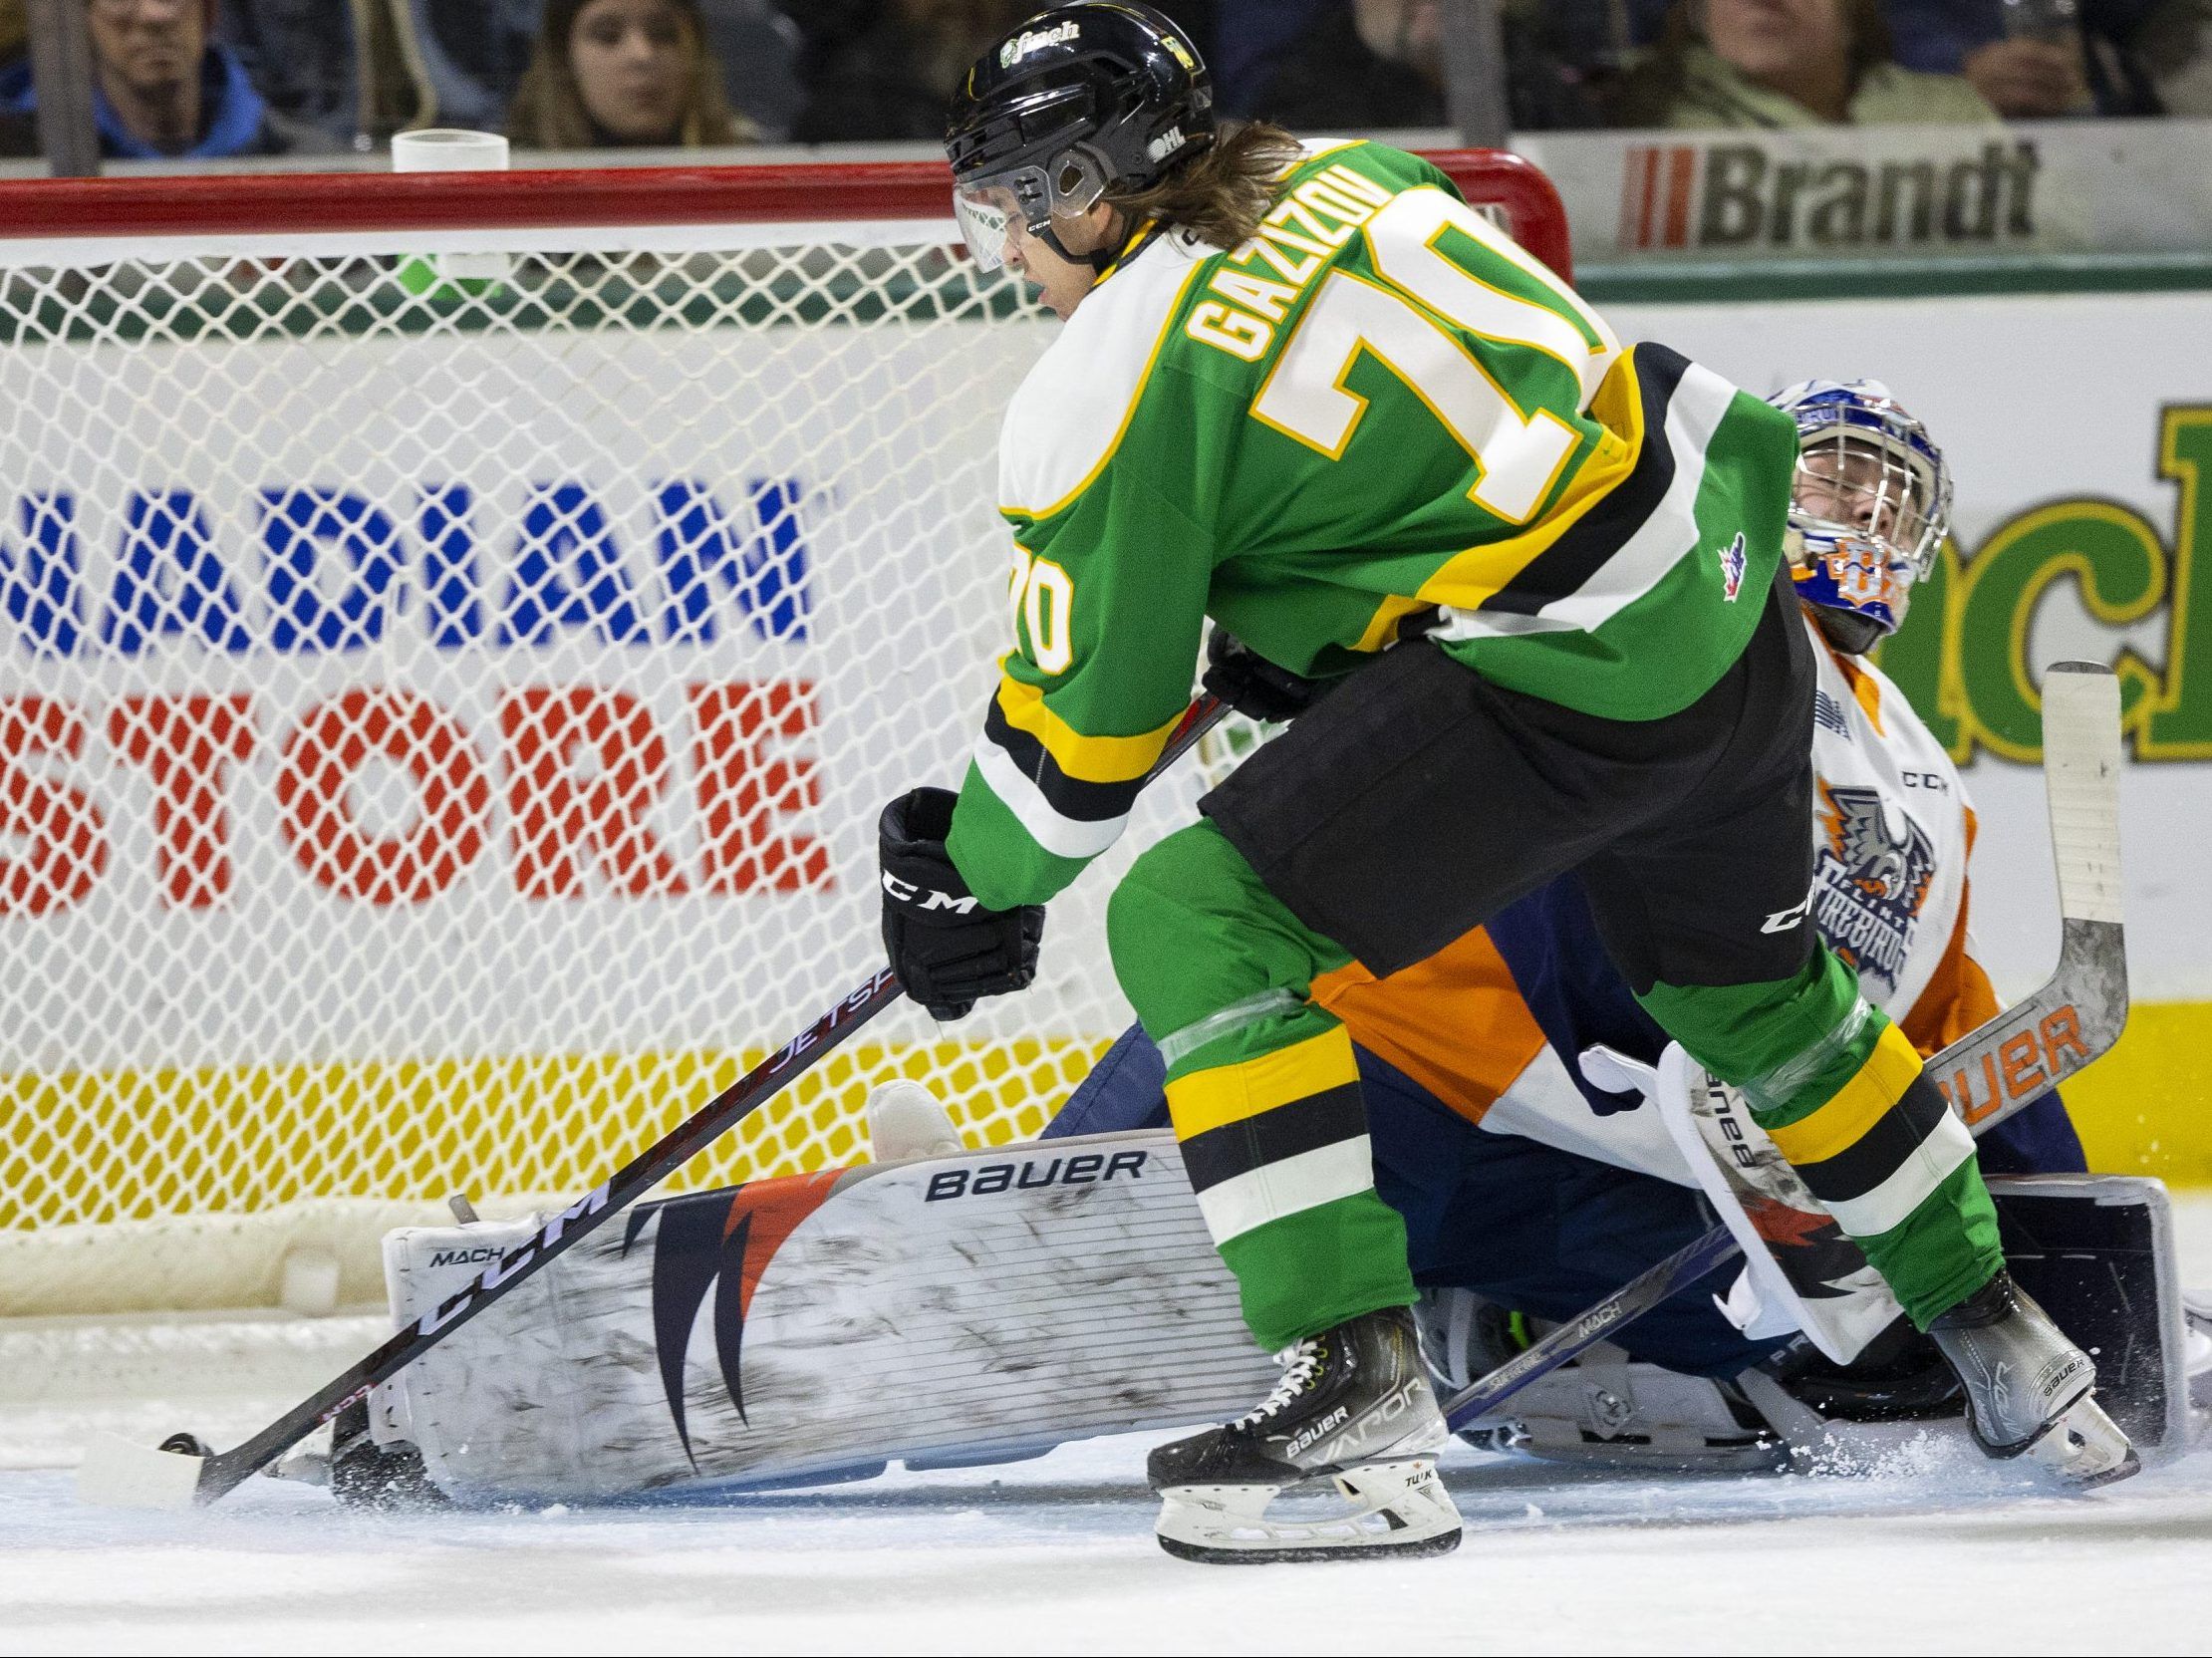 KNIGHTS CAN'T SOLVE WHALERS IN SHOOTOUT - London Knights